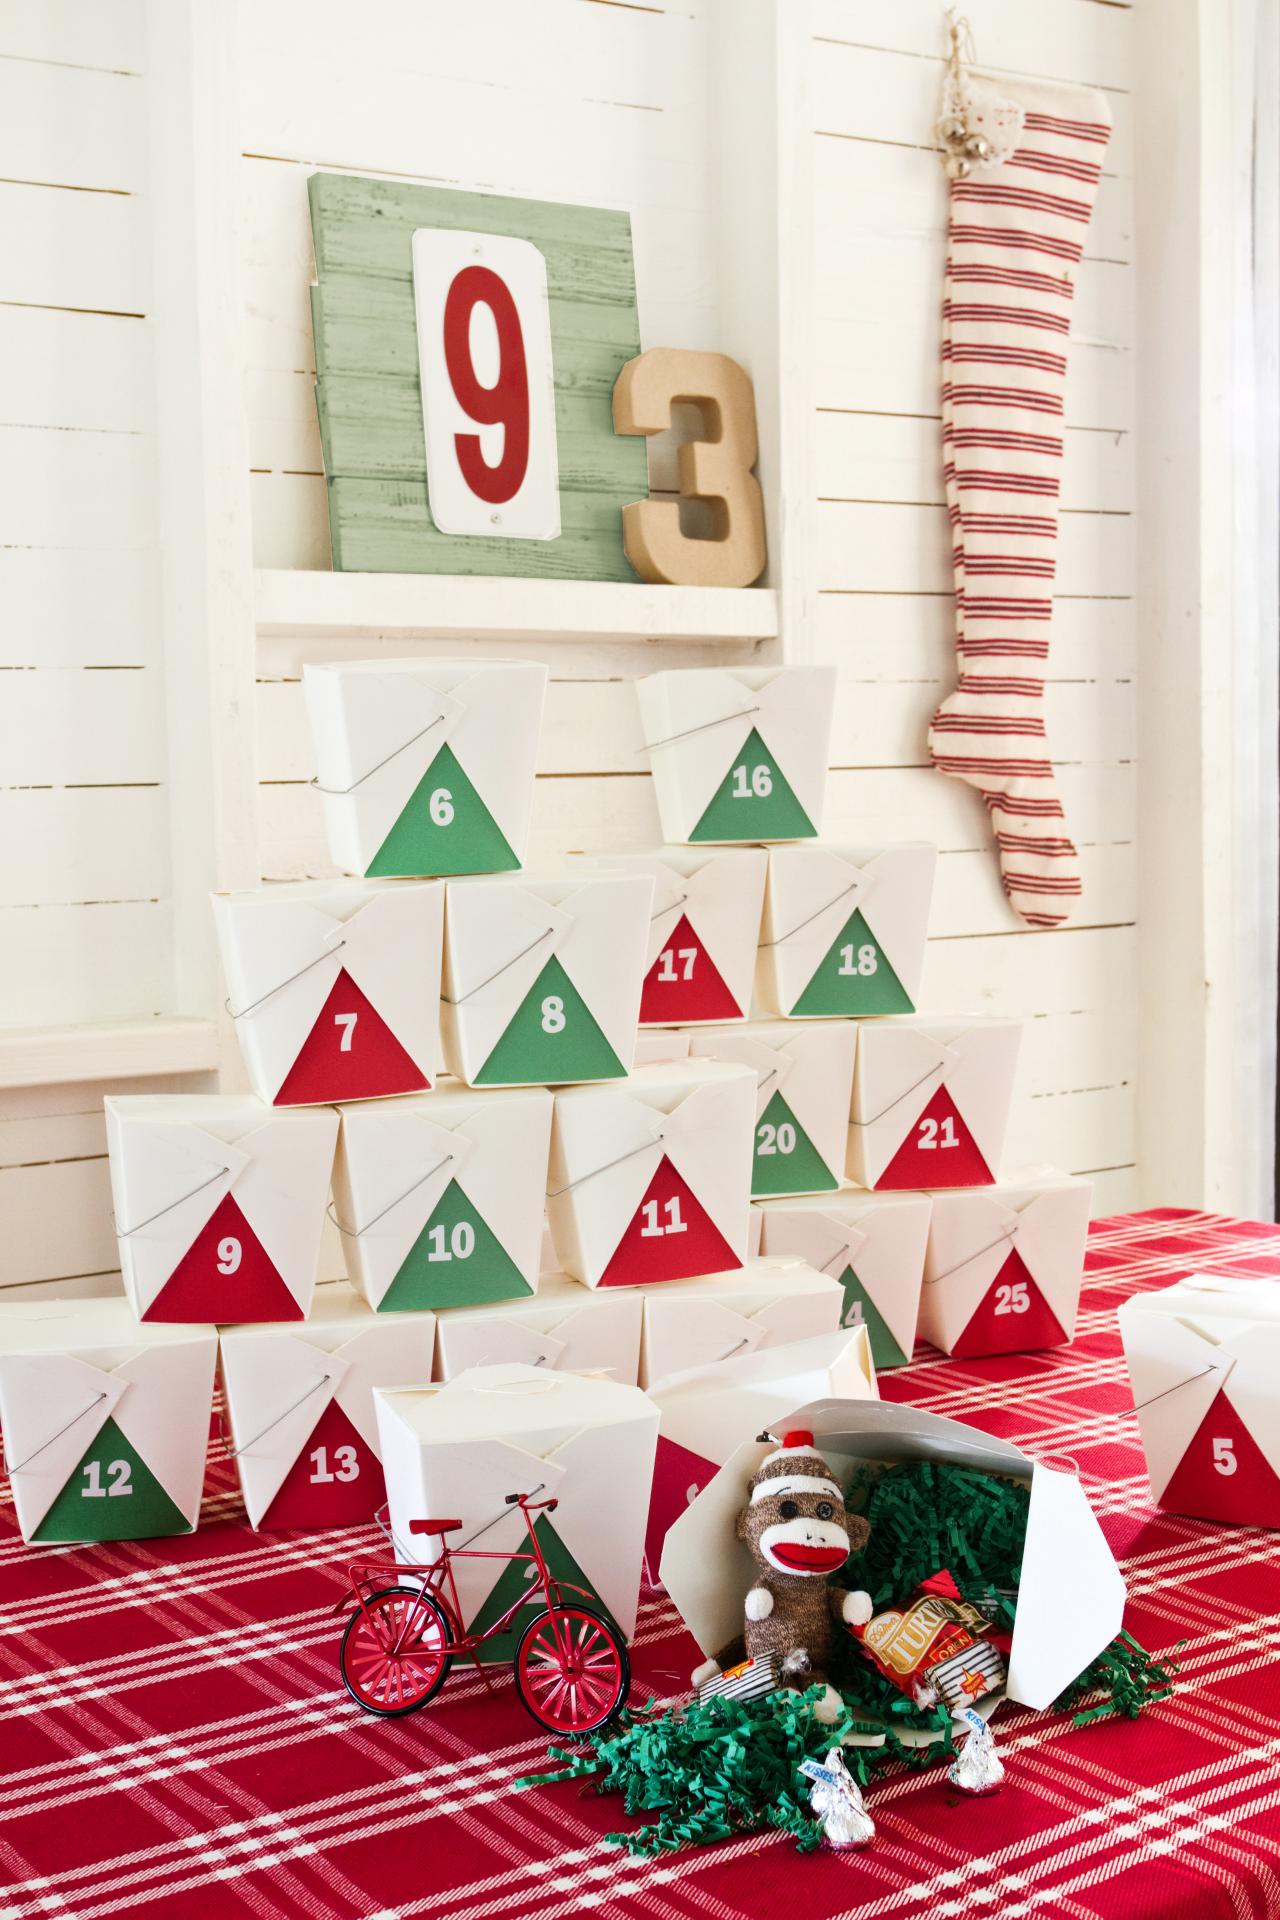 Make Your Own Takeout Box Advent Calendar Hgtv